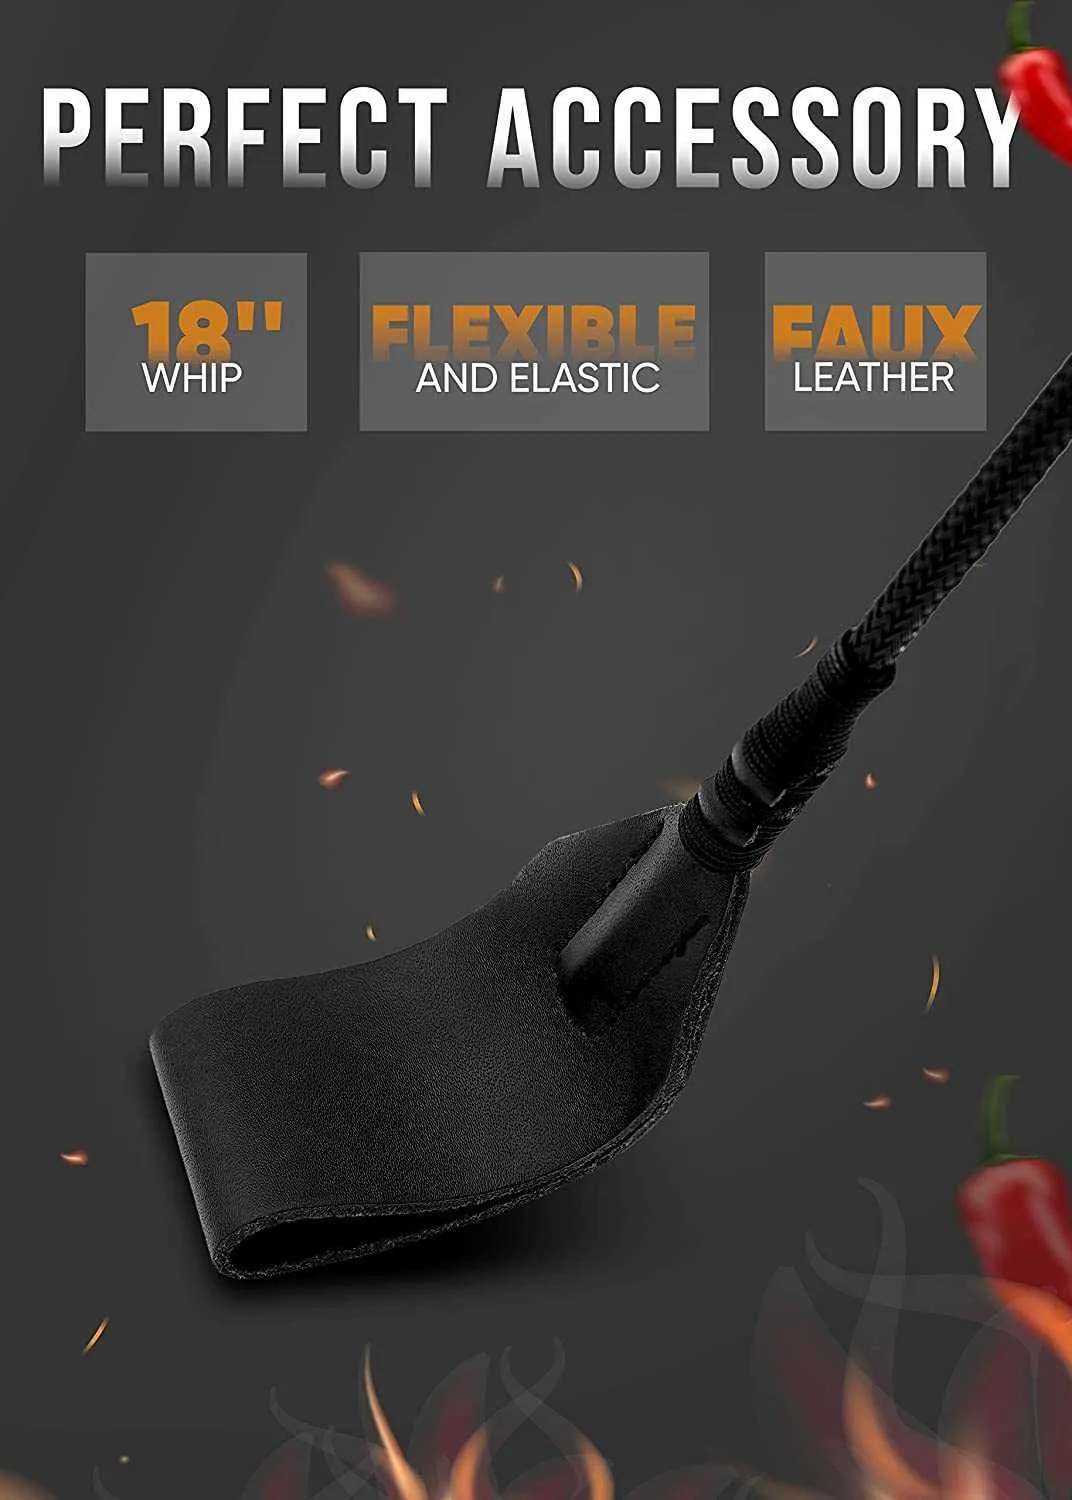 MALINERO Faux Leather Whip Riding Crop Set For Flogger Spanking And Adult  Play Factory Outlet From Brighteyebagshop5, $13.6